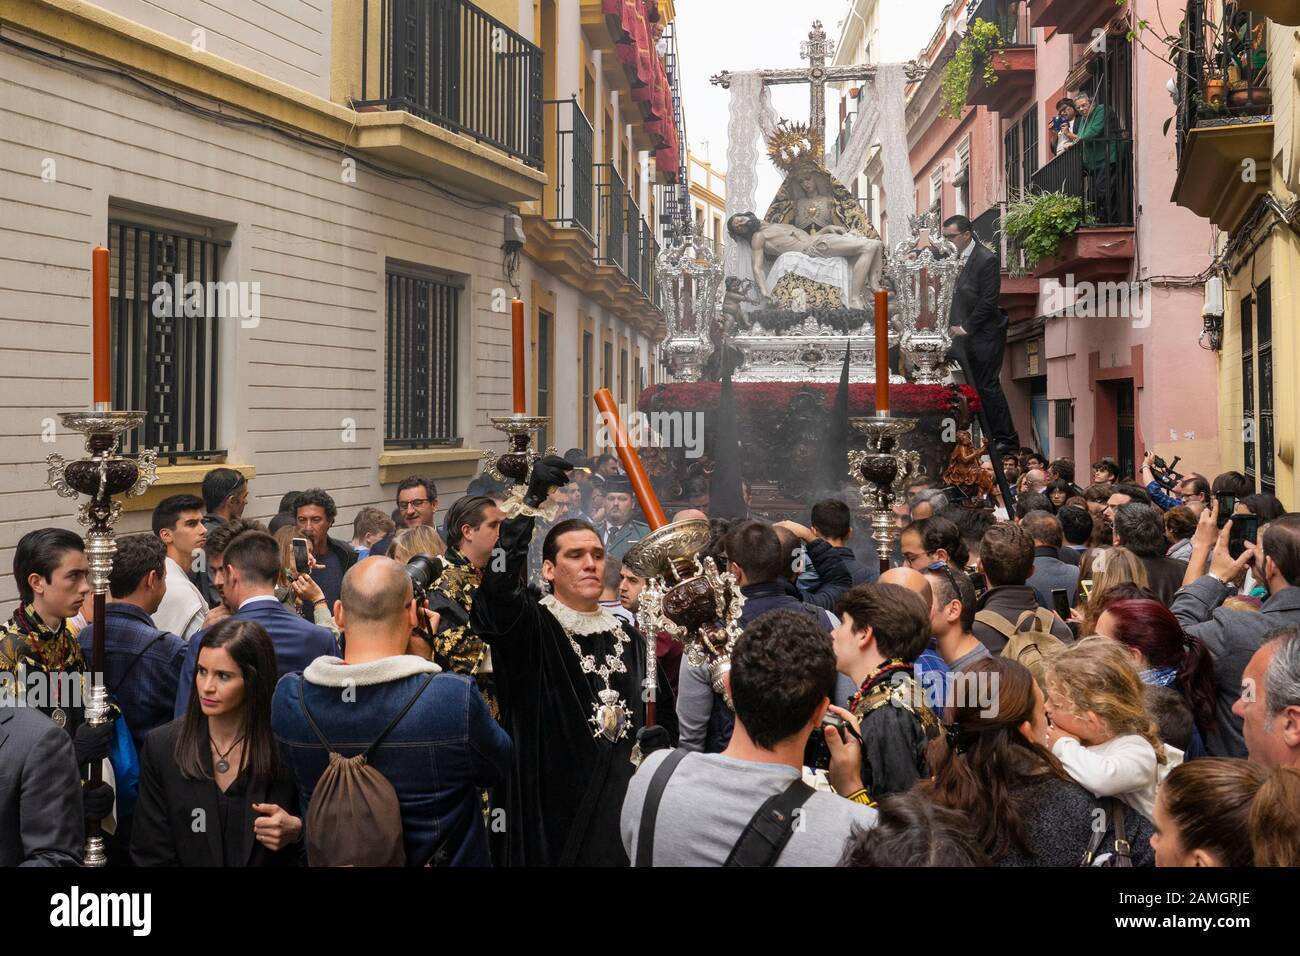 Semana santa , Easter religious parade event in Seville, Andalusia,Spain Stock Photo